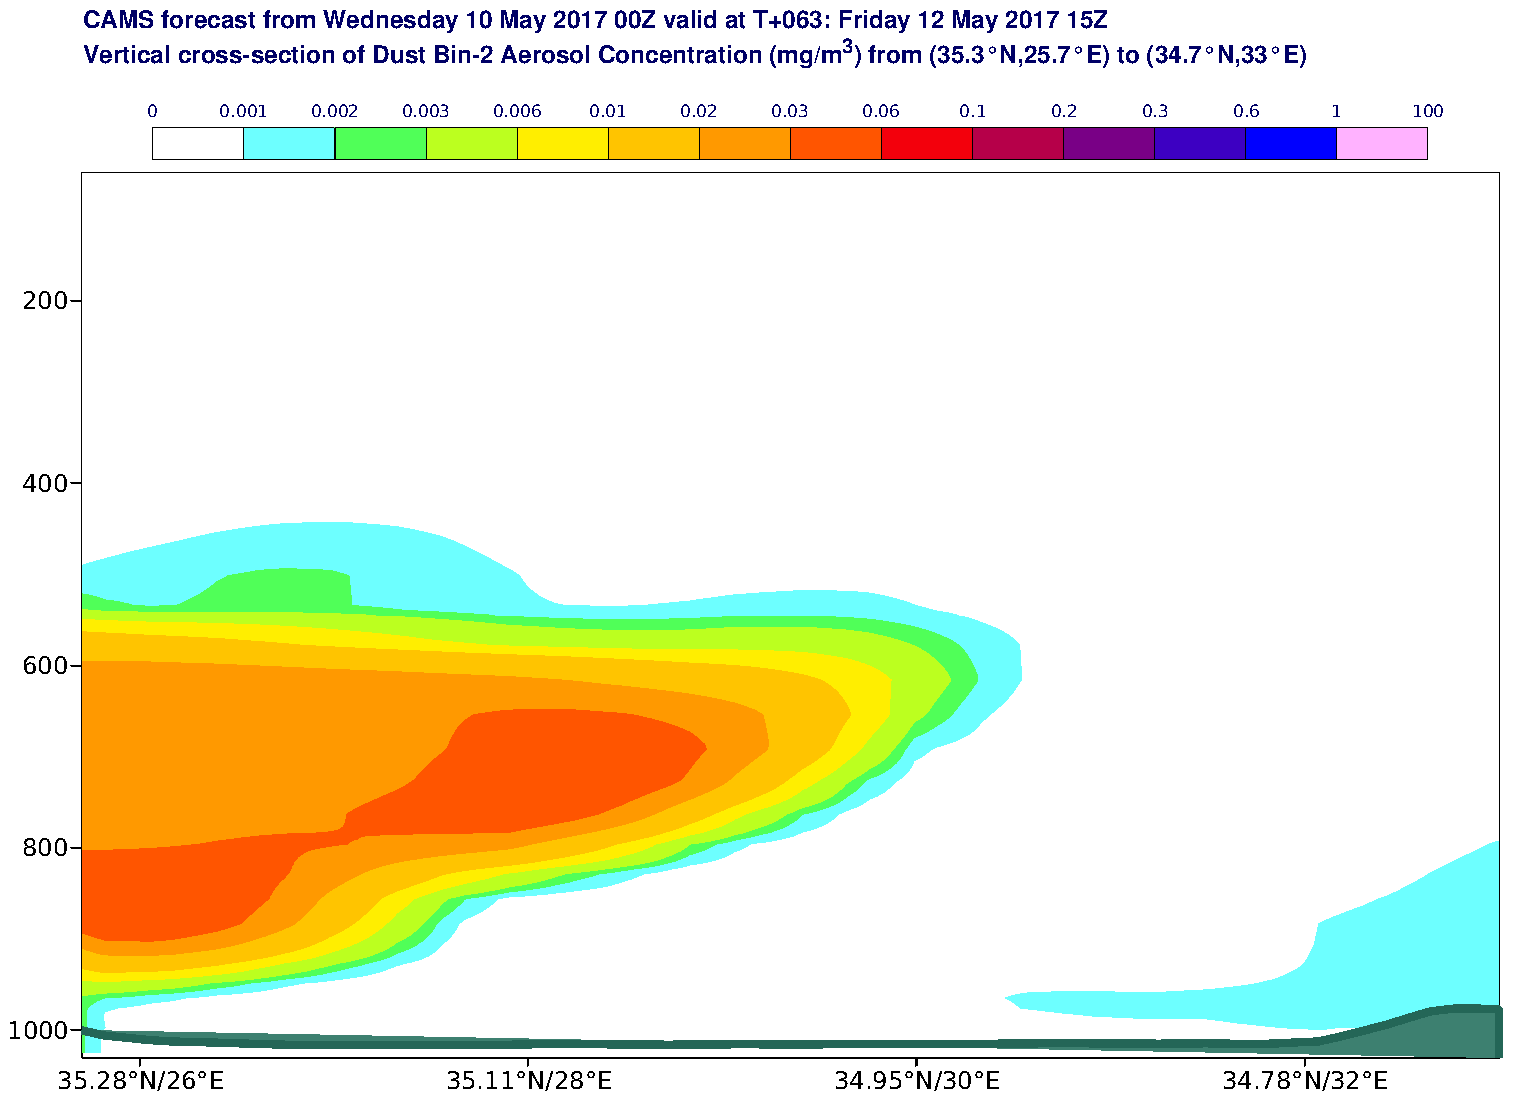 Vertical cross-section of Dust Bin-2 Aerosol Concentration (mg/m3) valid at T63 - 2017-05-12 15:00